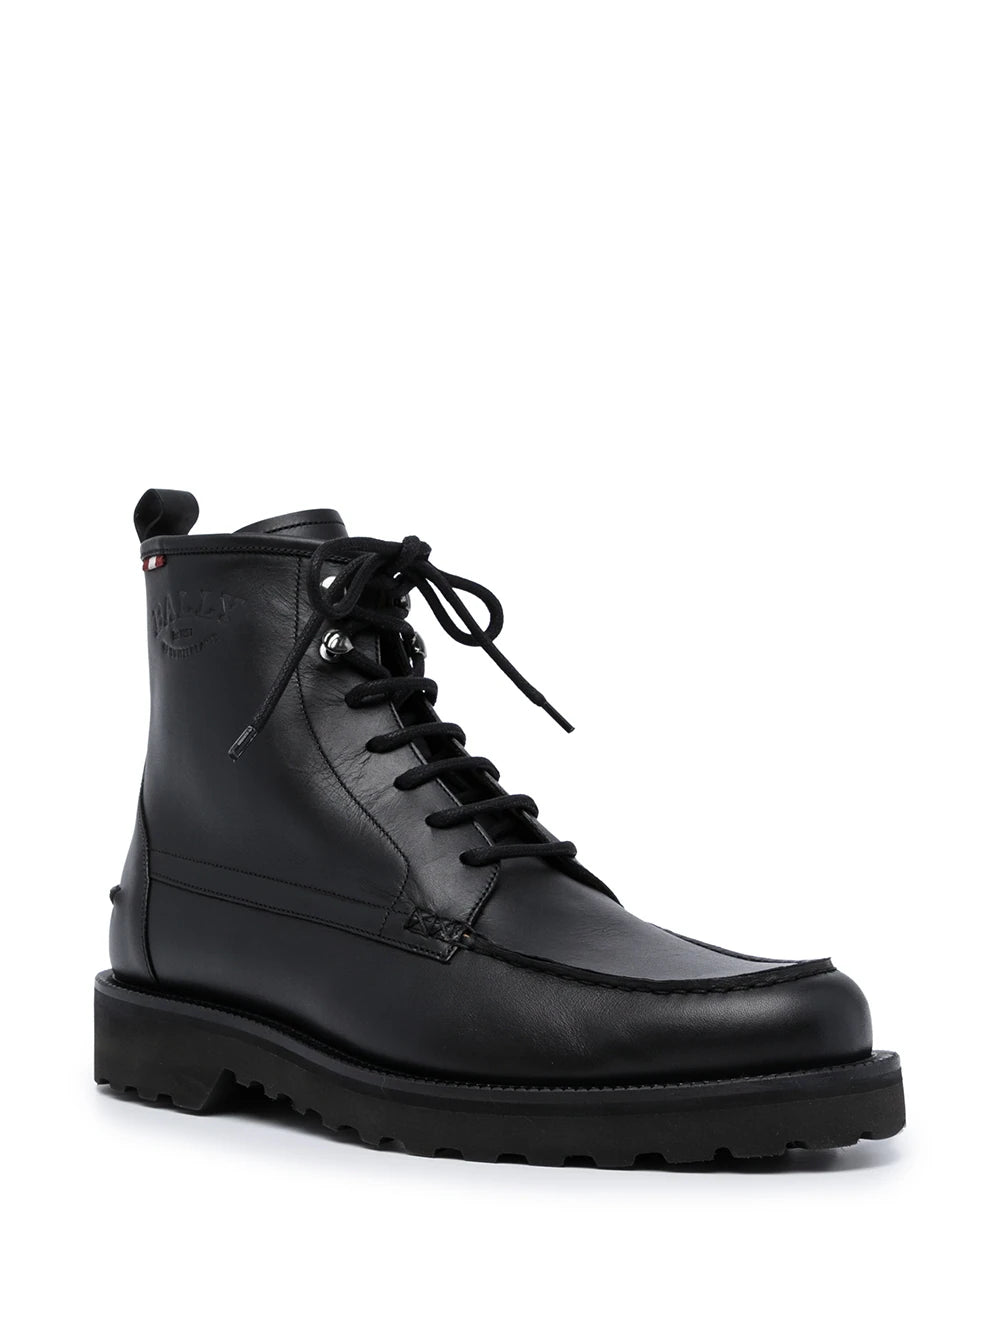 Bally Nokor/20 leather lace-up boots